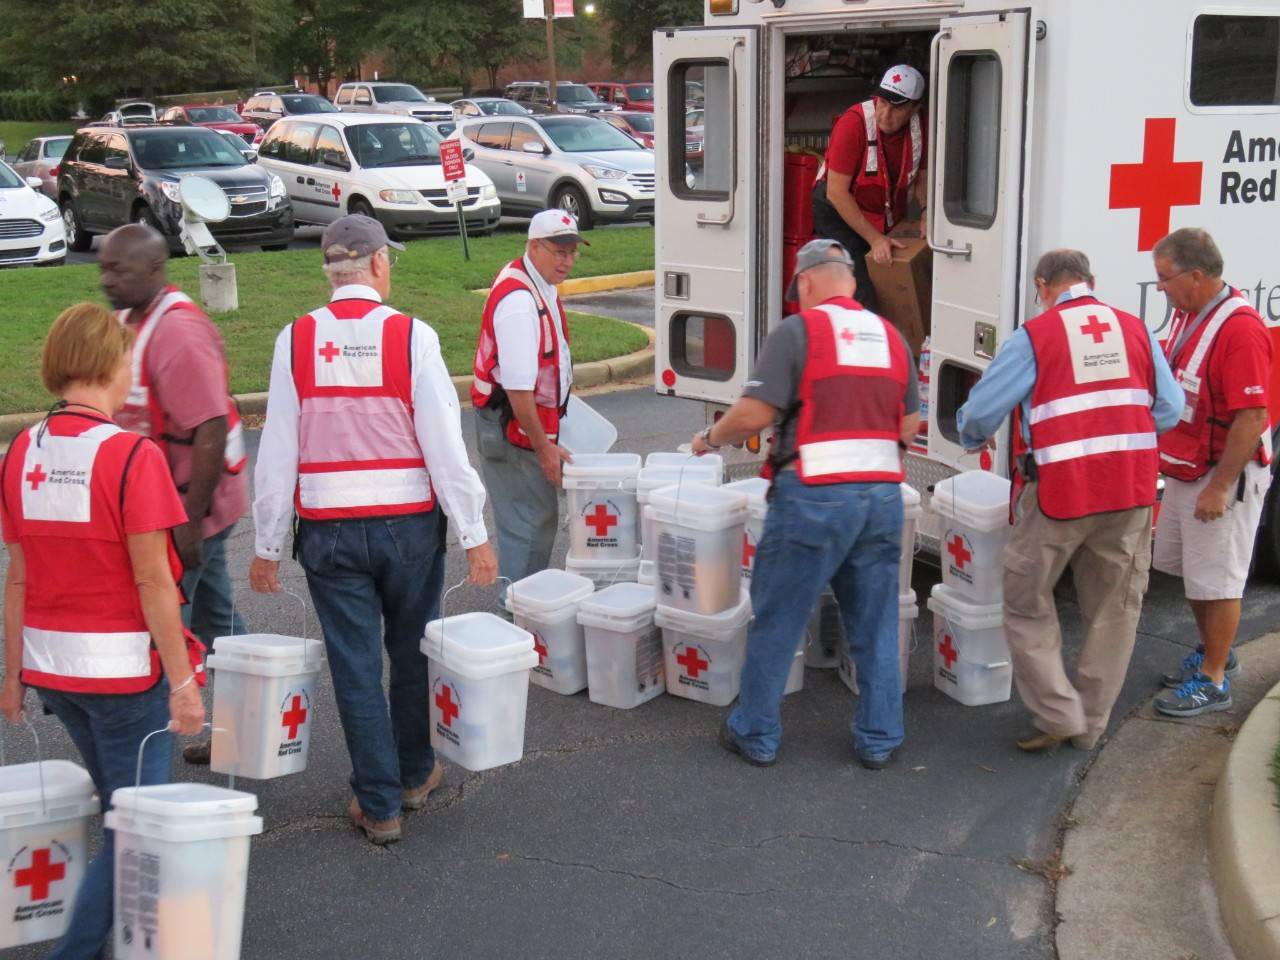 Red Cross volunteers load cleanup kits into an Emergency Response Vehicle for delivery to residents of Myrtle Beach, S.C. (Photo by Carl Manning/American Red Cross)